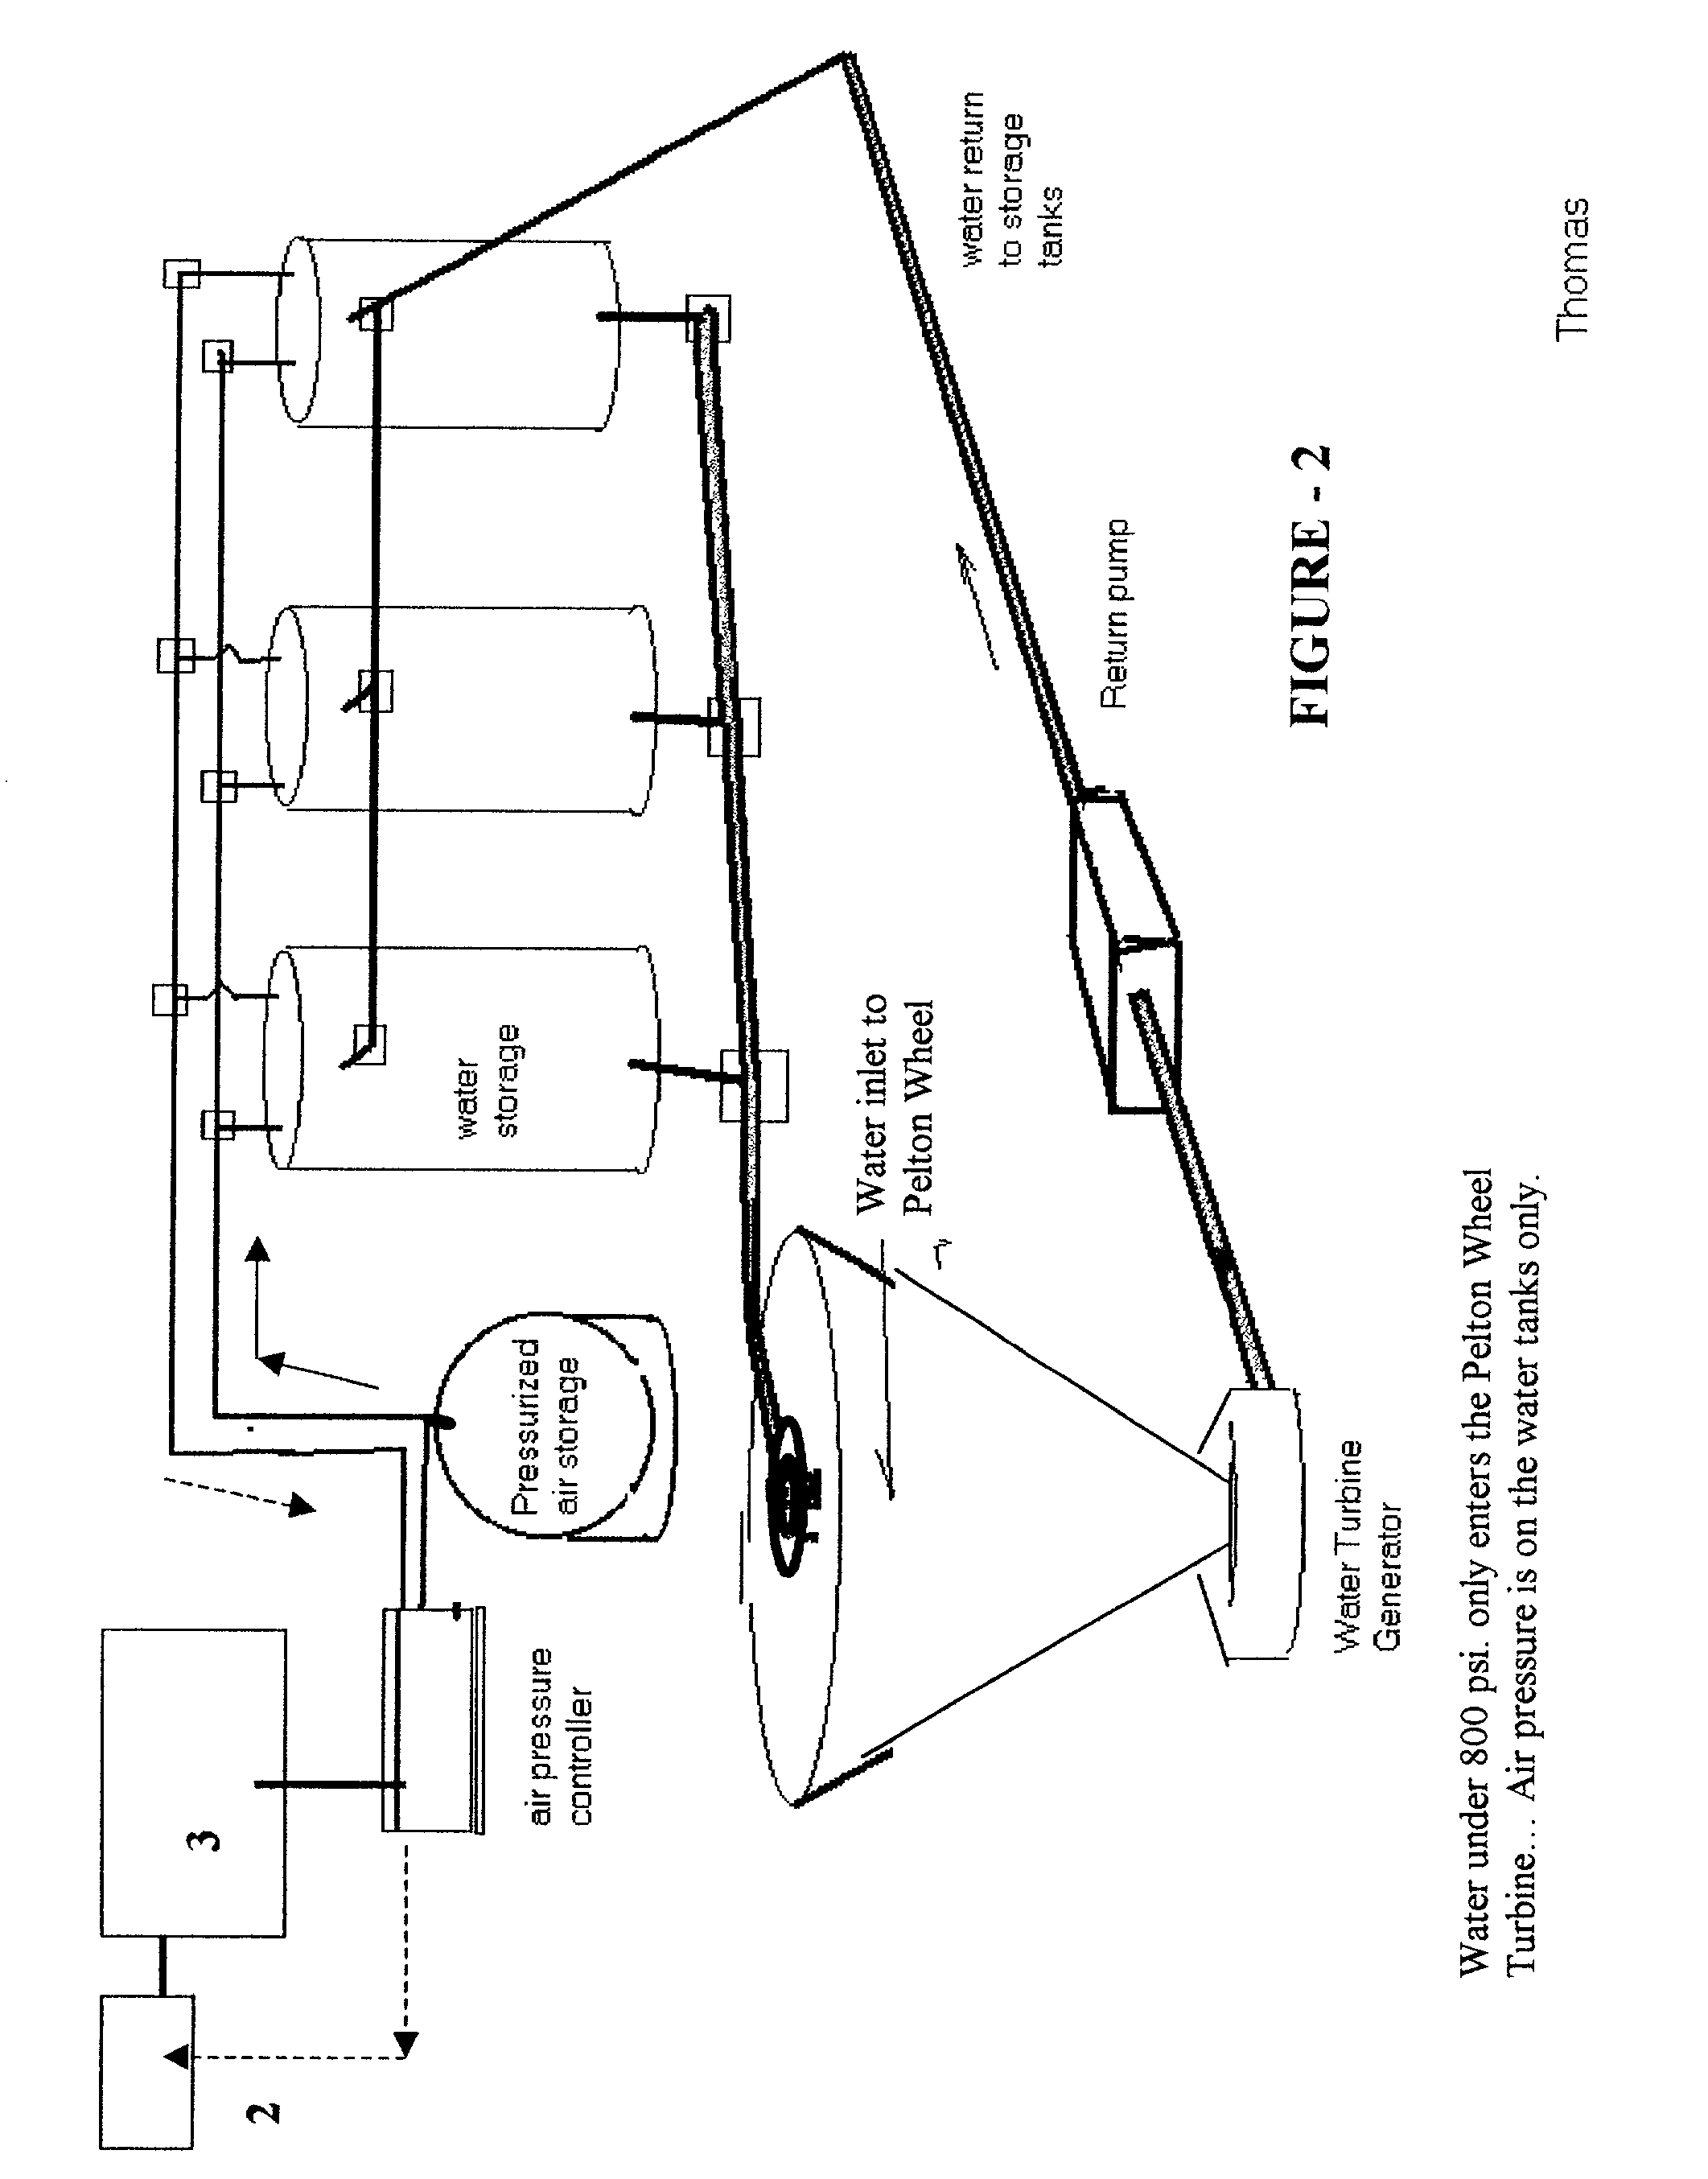 Wind powered hydroelectric power plant and method of operation thereof